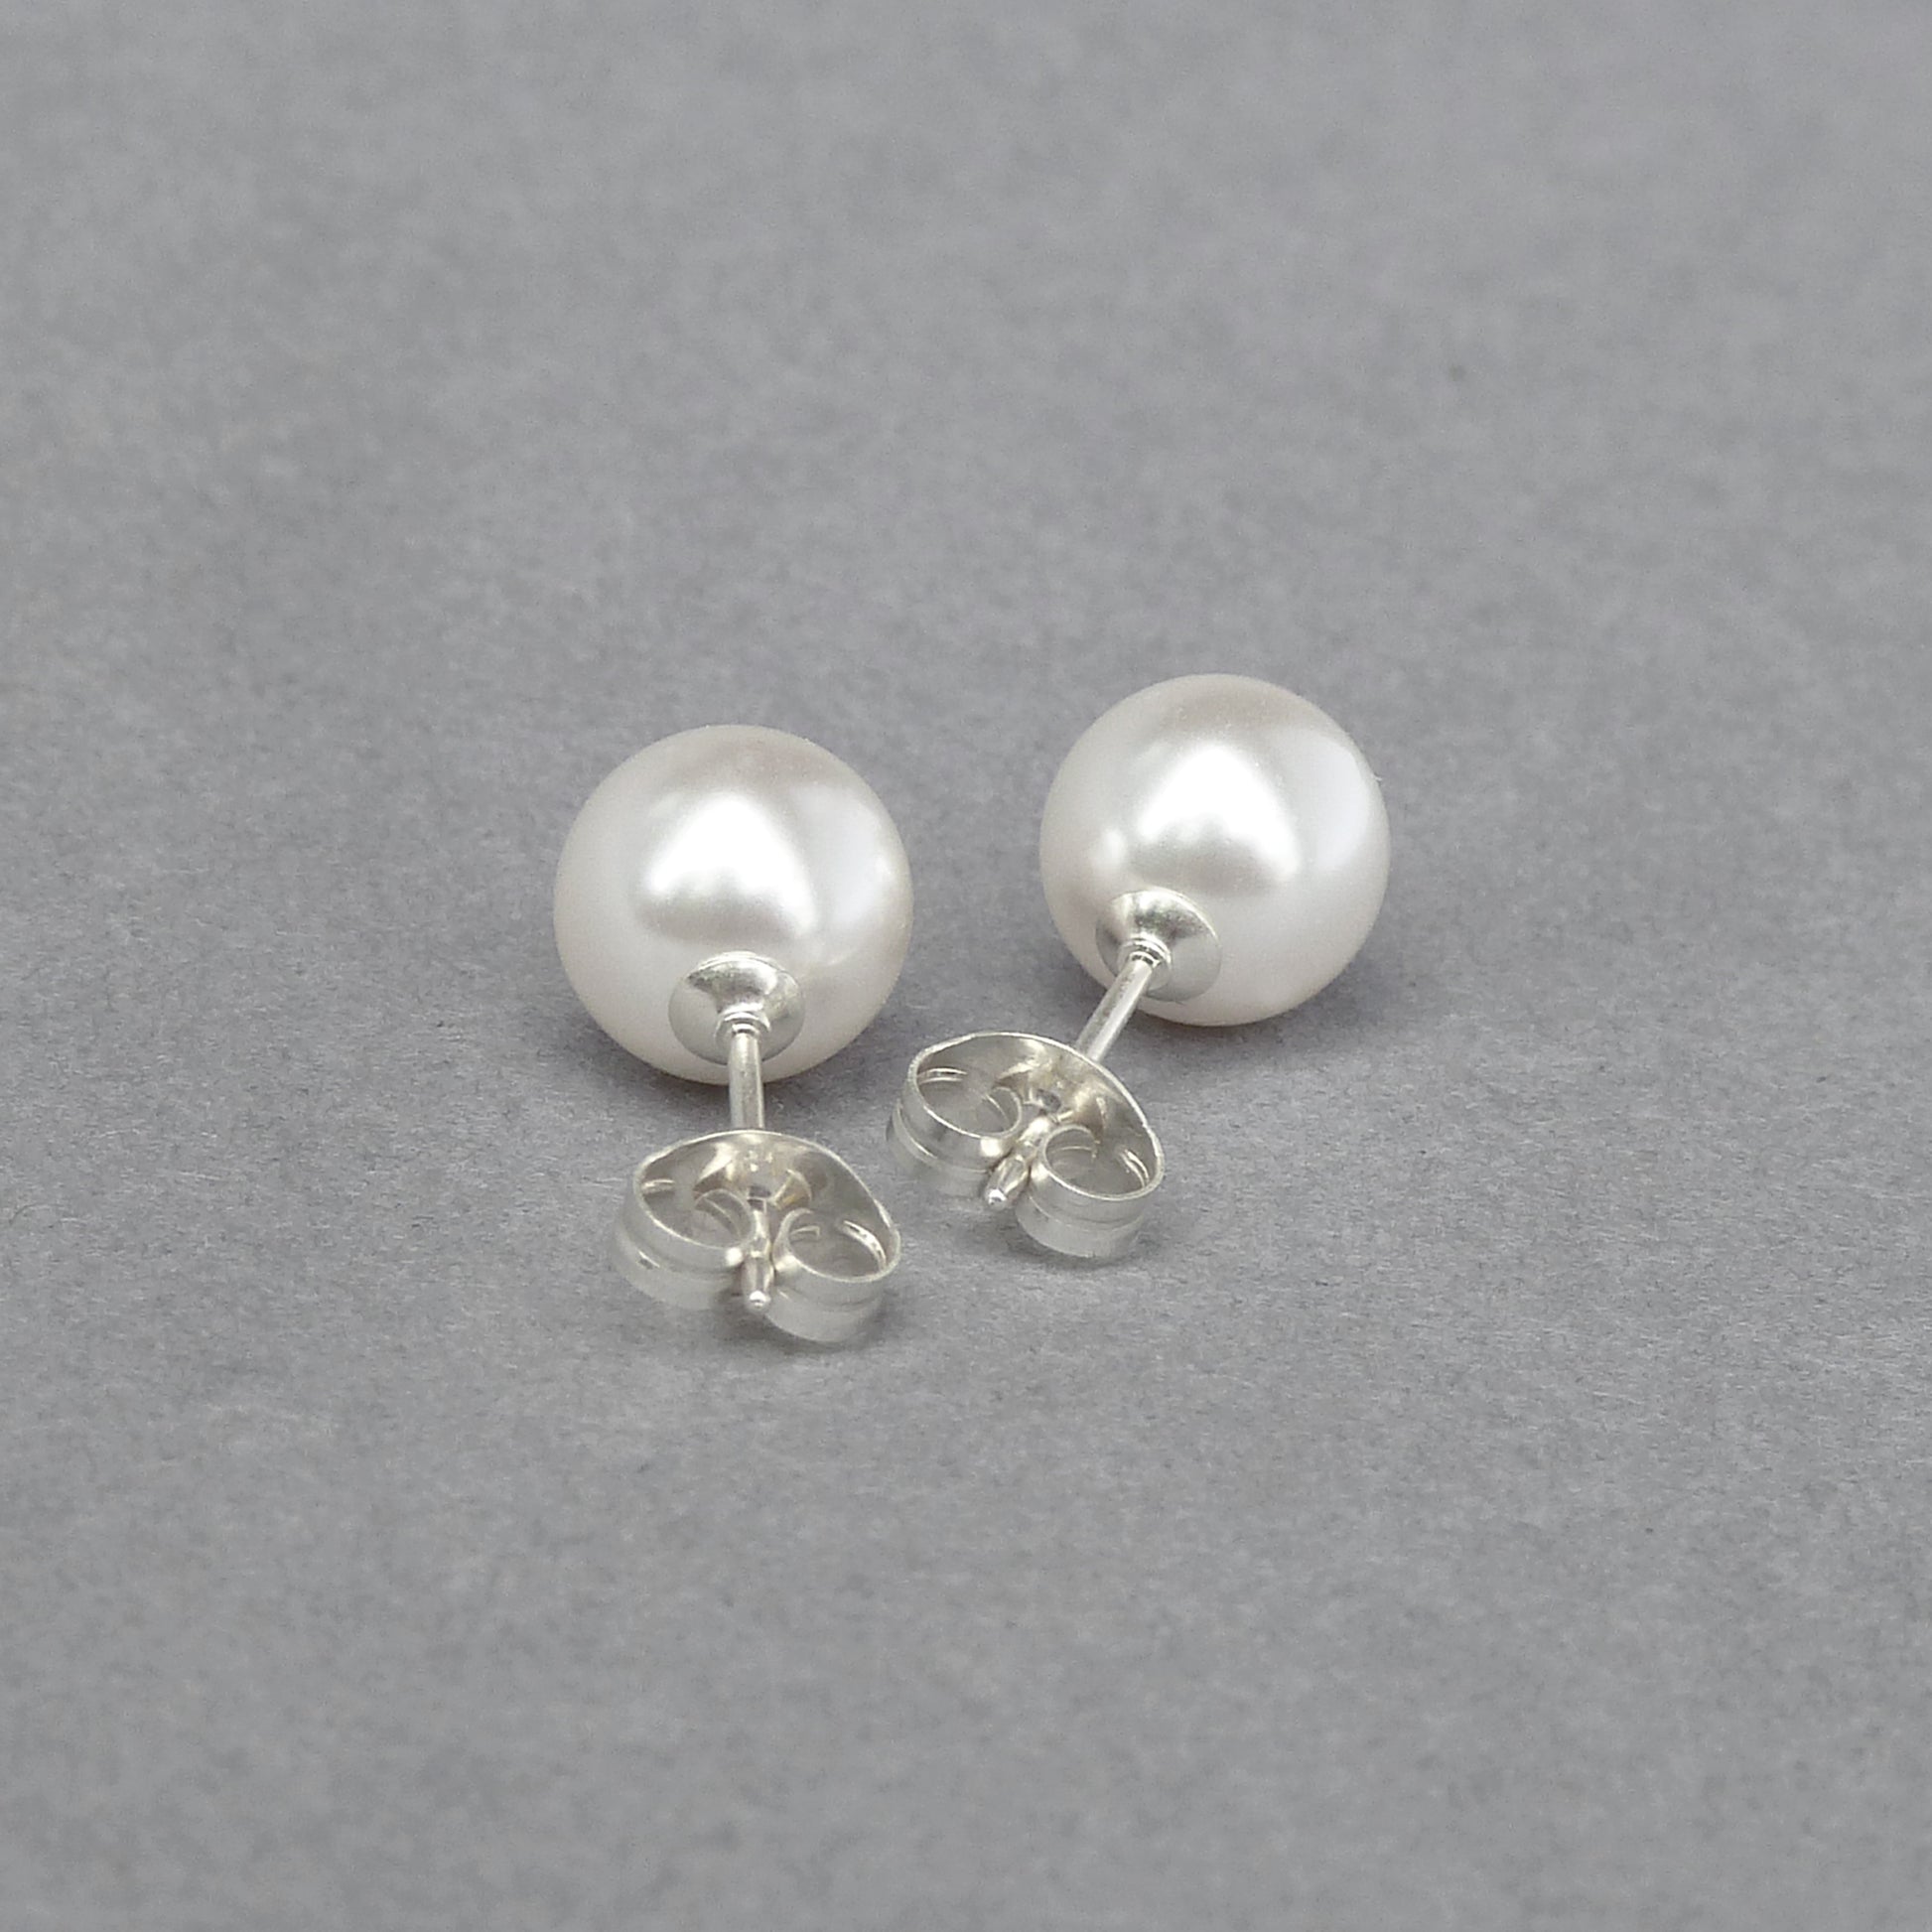 8mm white pearl studs with Sterling silver posts